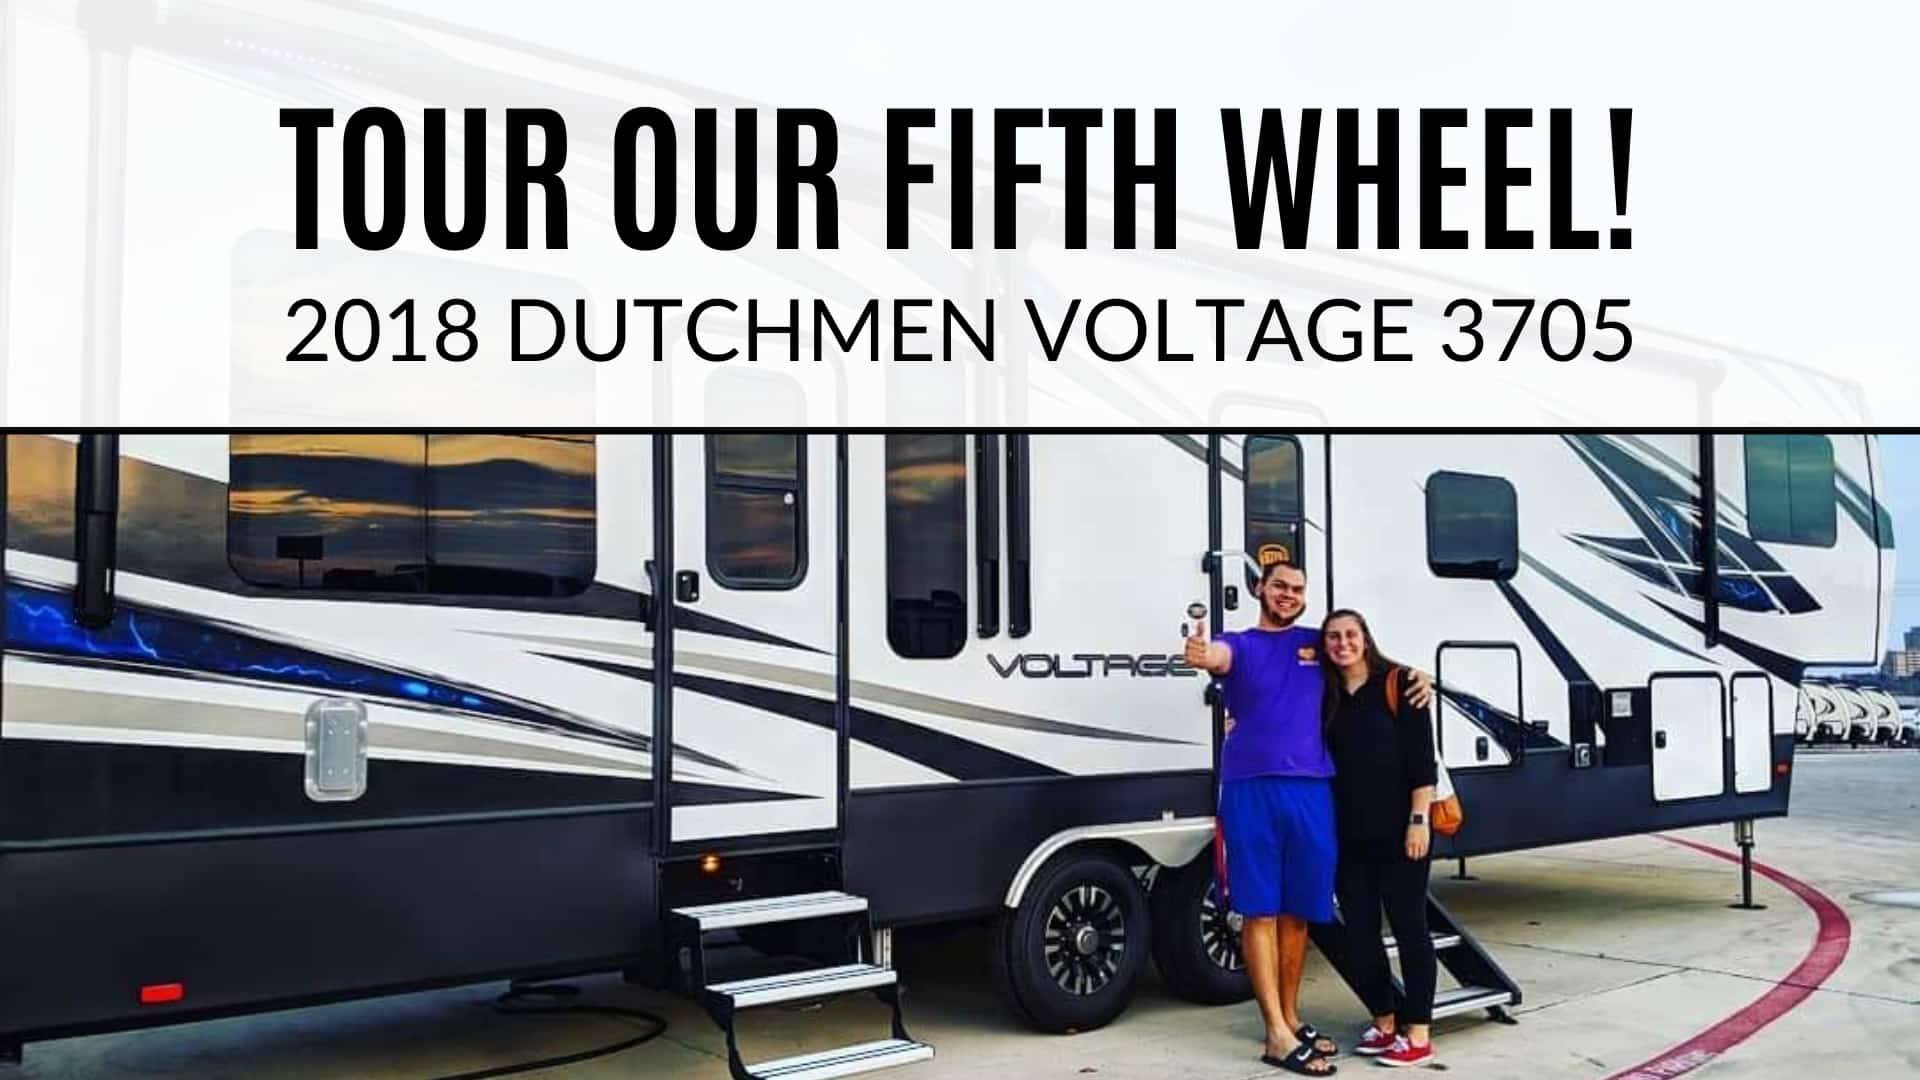 Philip and Megan standing in front of their Dutchmen Voltage Fifth Wheel on the day they bought it. Philip is giving a thumbs up. Text at the top of the image says "Tour Our Fifth Wheel! 2018 Dutchmen Voltage 3705"